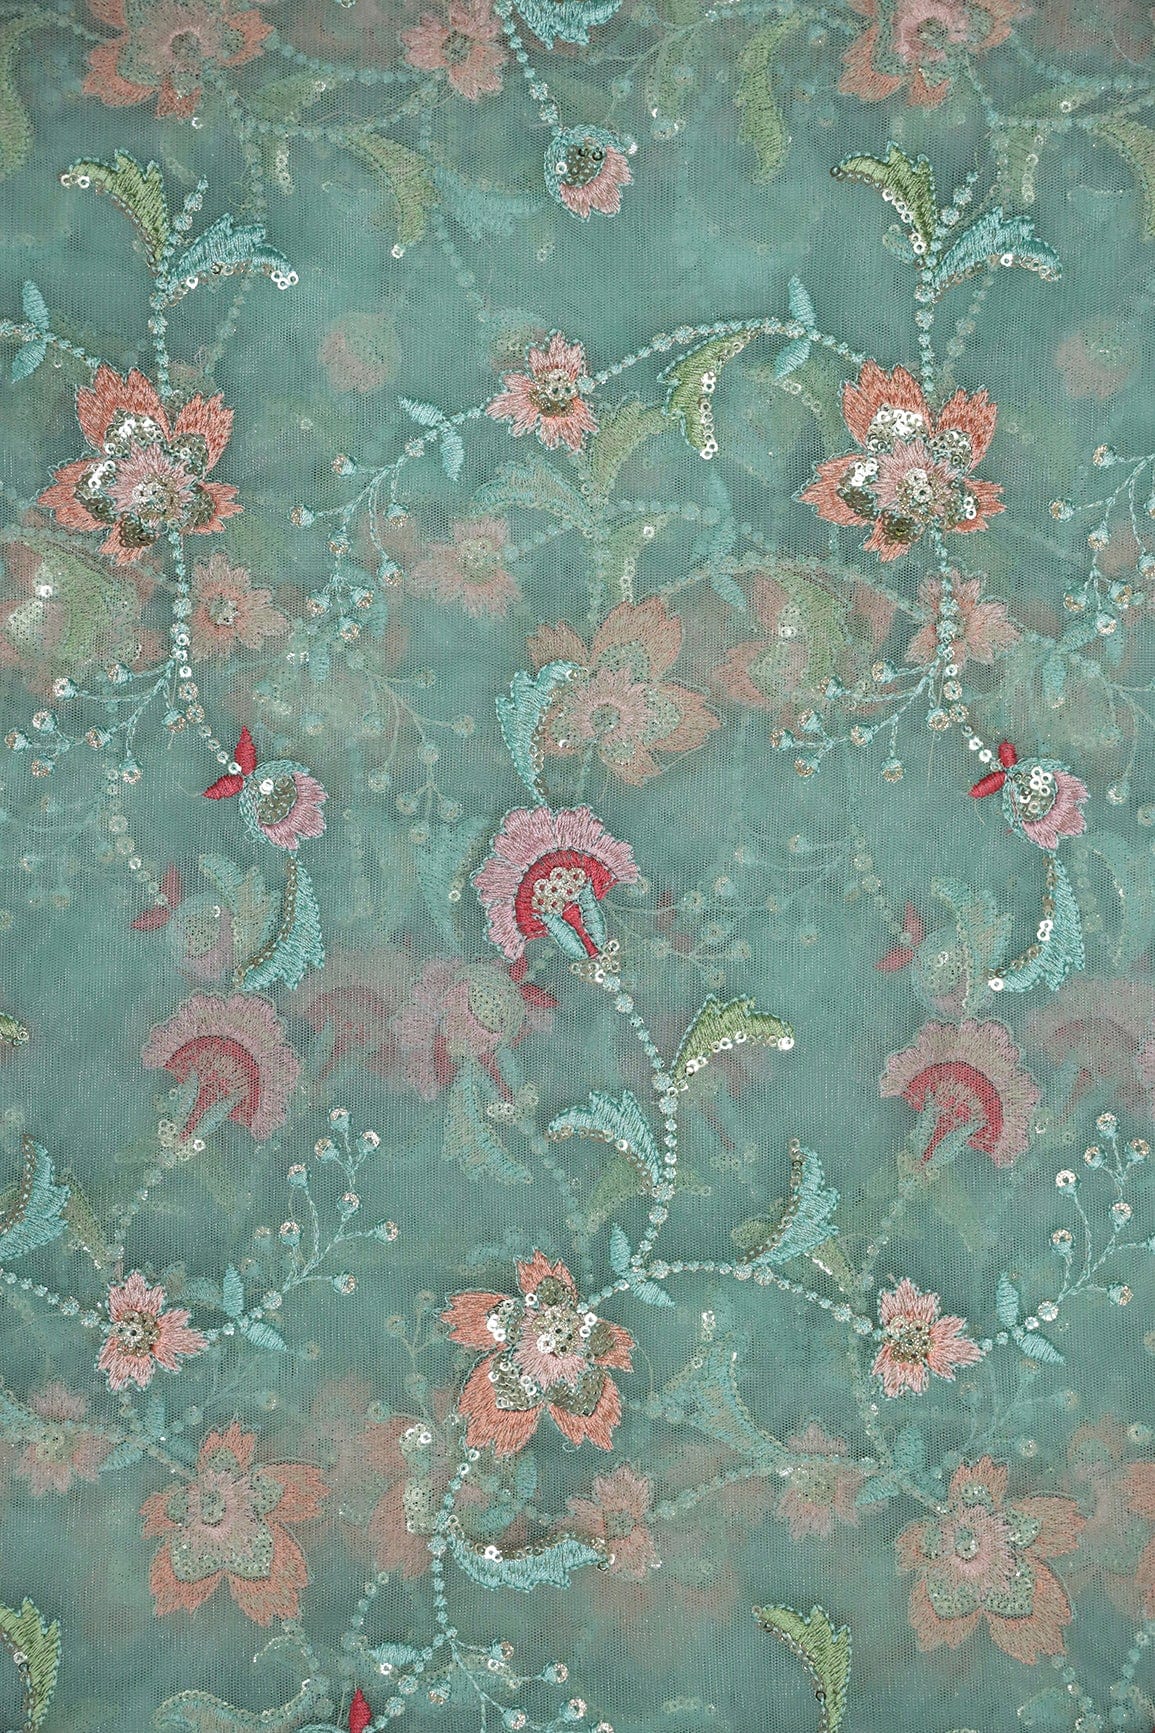 doeraa Embroidery Fabrics Multi Color Thread With Gold Sequins Beautiful Floral Embroidery Work On Tiffany Blue Soft Net Fabric